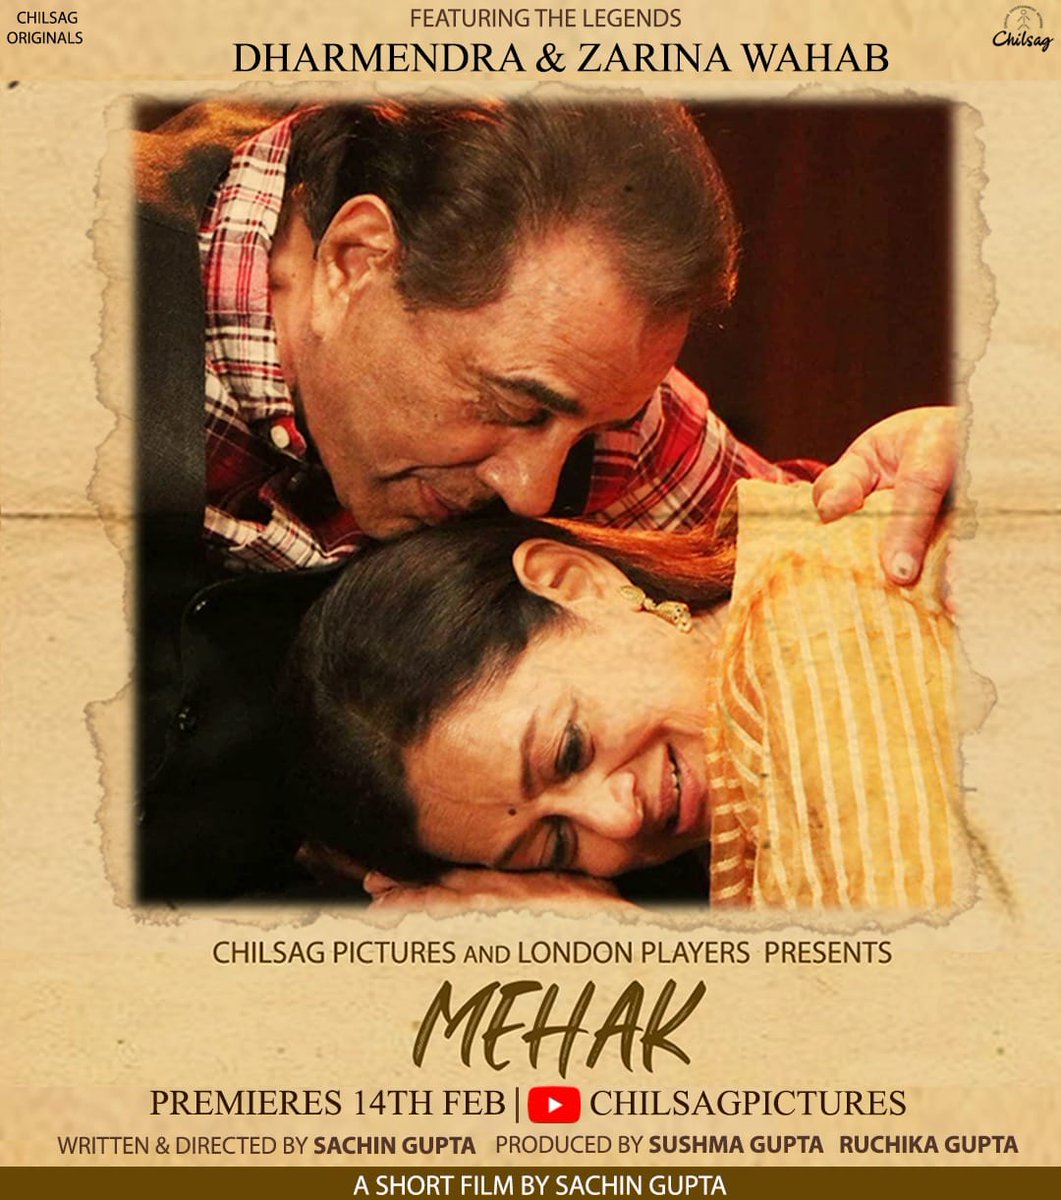 Proudly, presenting ‘Mehek’, a Chilsag Original #shortfilms featuring the legendary #Dharmendra & #Zarinawahab a fresh and evergreen on-screen pair to the screens on 14th February, 2022 ,Written & Directed by #SachinGupta Produced by #ChilsagPictures #filmmaking #bollywood